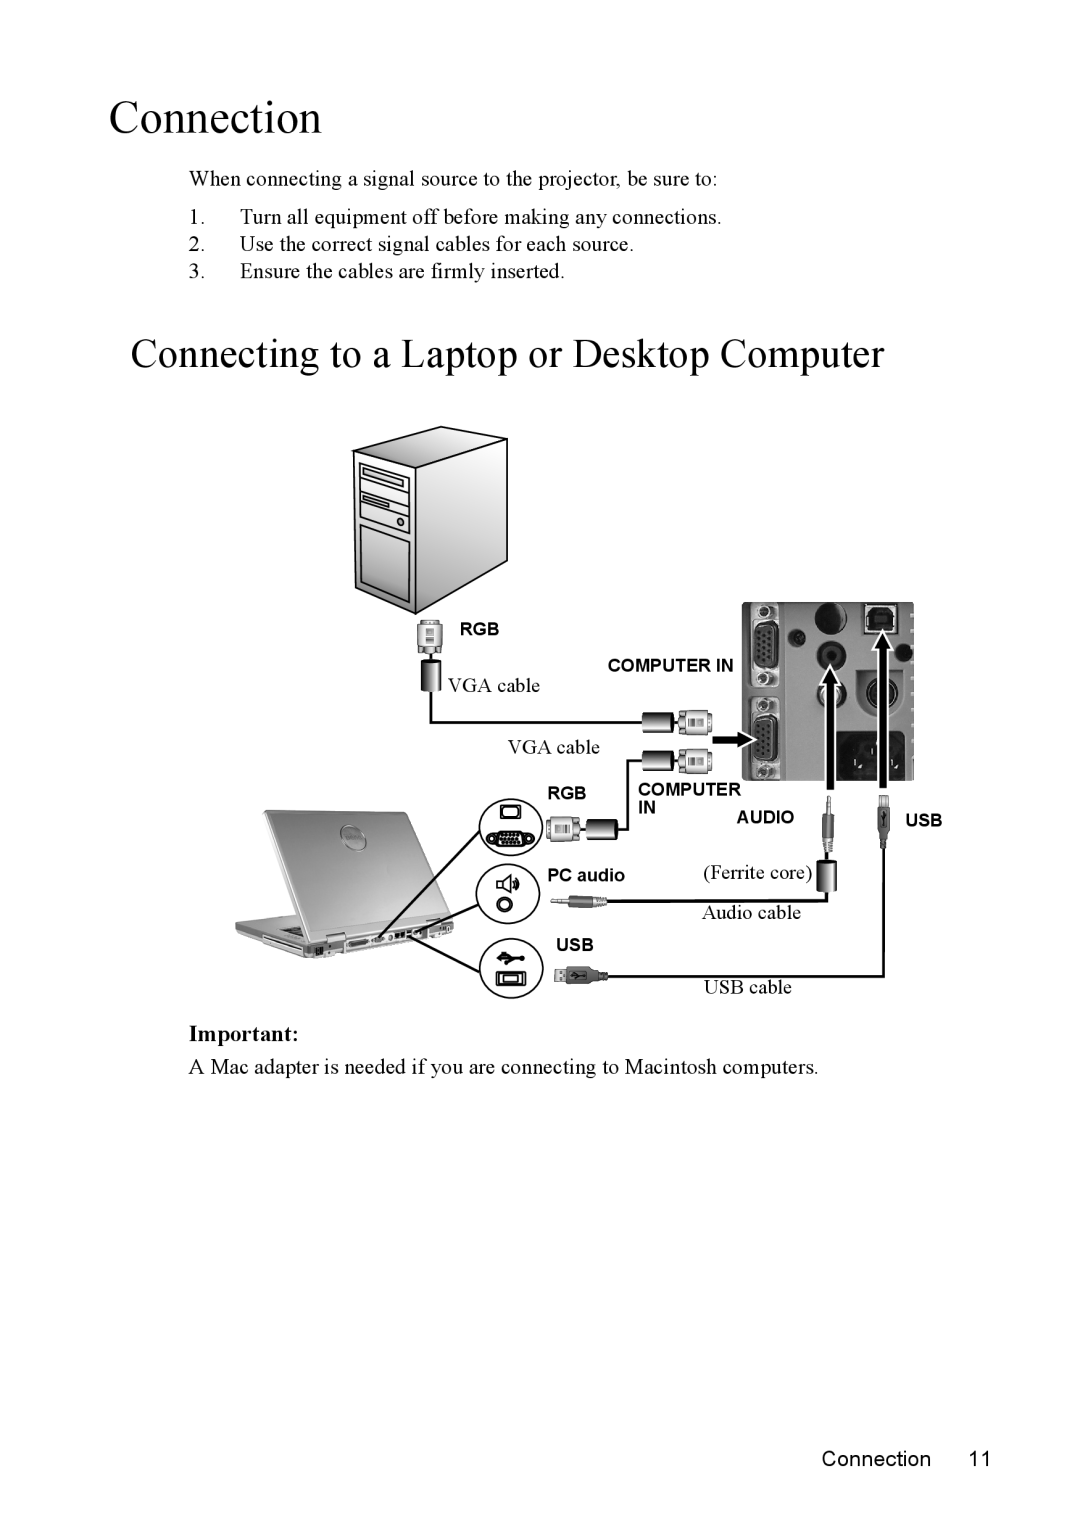 Mitsubishi Electronics SE2U user manual Connection, Connecting to a Laptop or Desktop Computer 